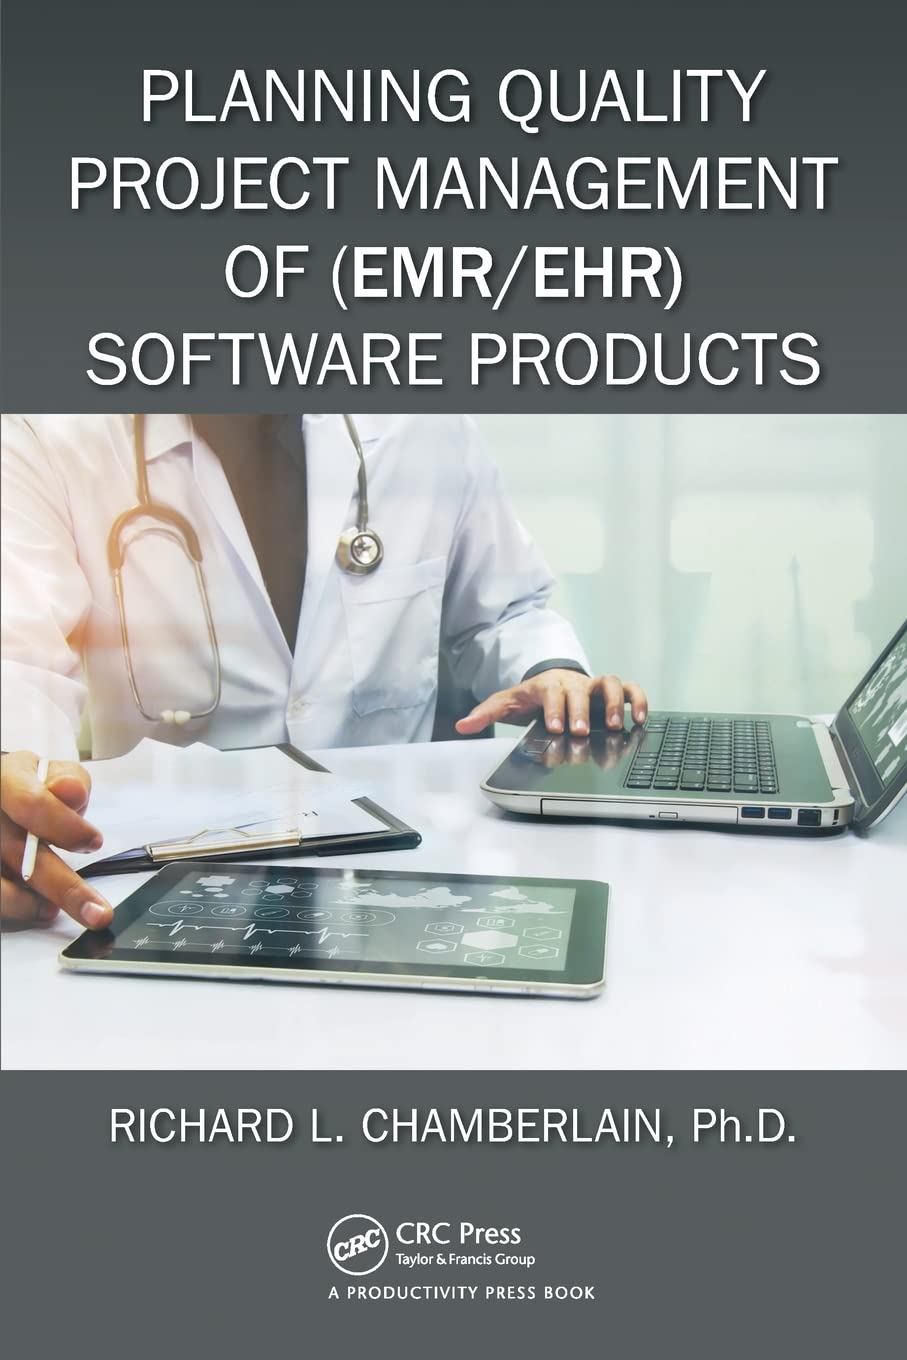 Planning Quality Project Management of (EMR/EHR) Software Products (HIMSS Book Series)